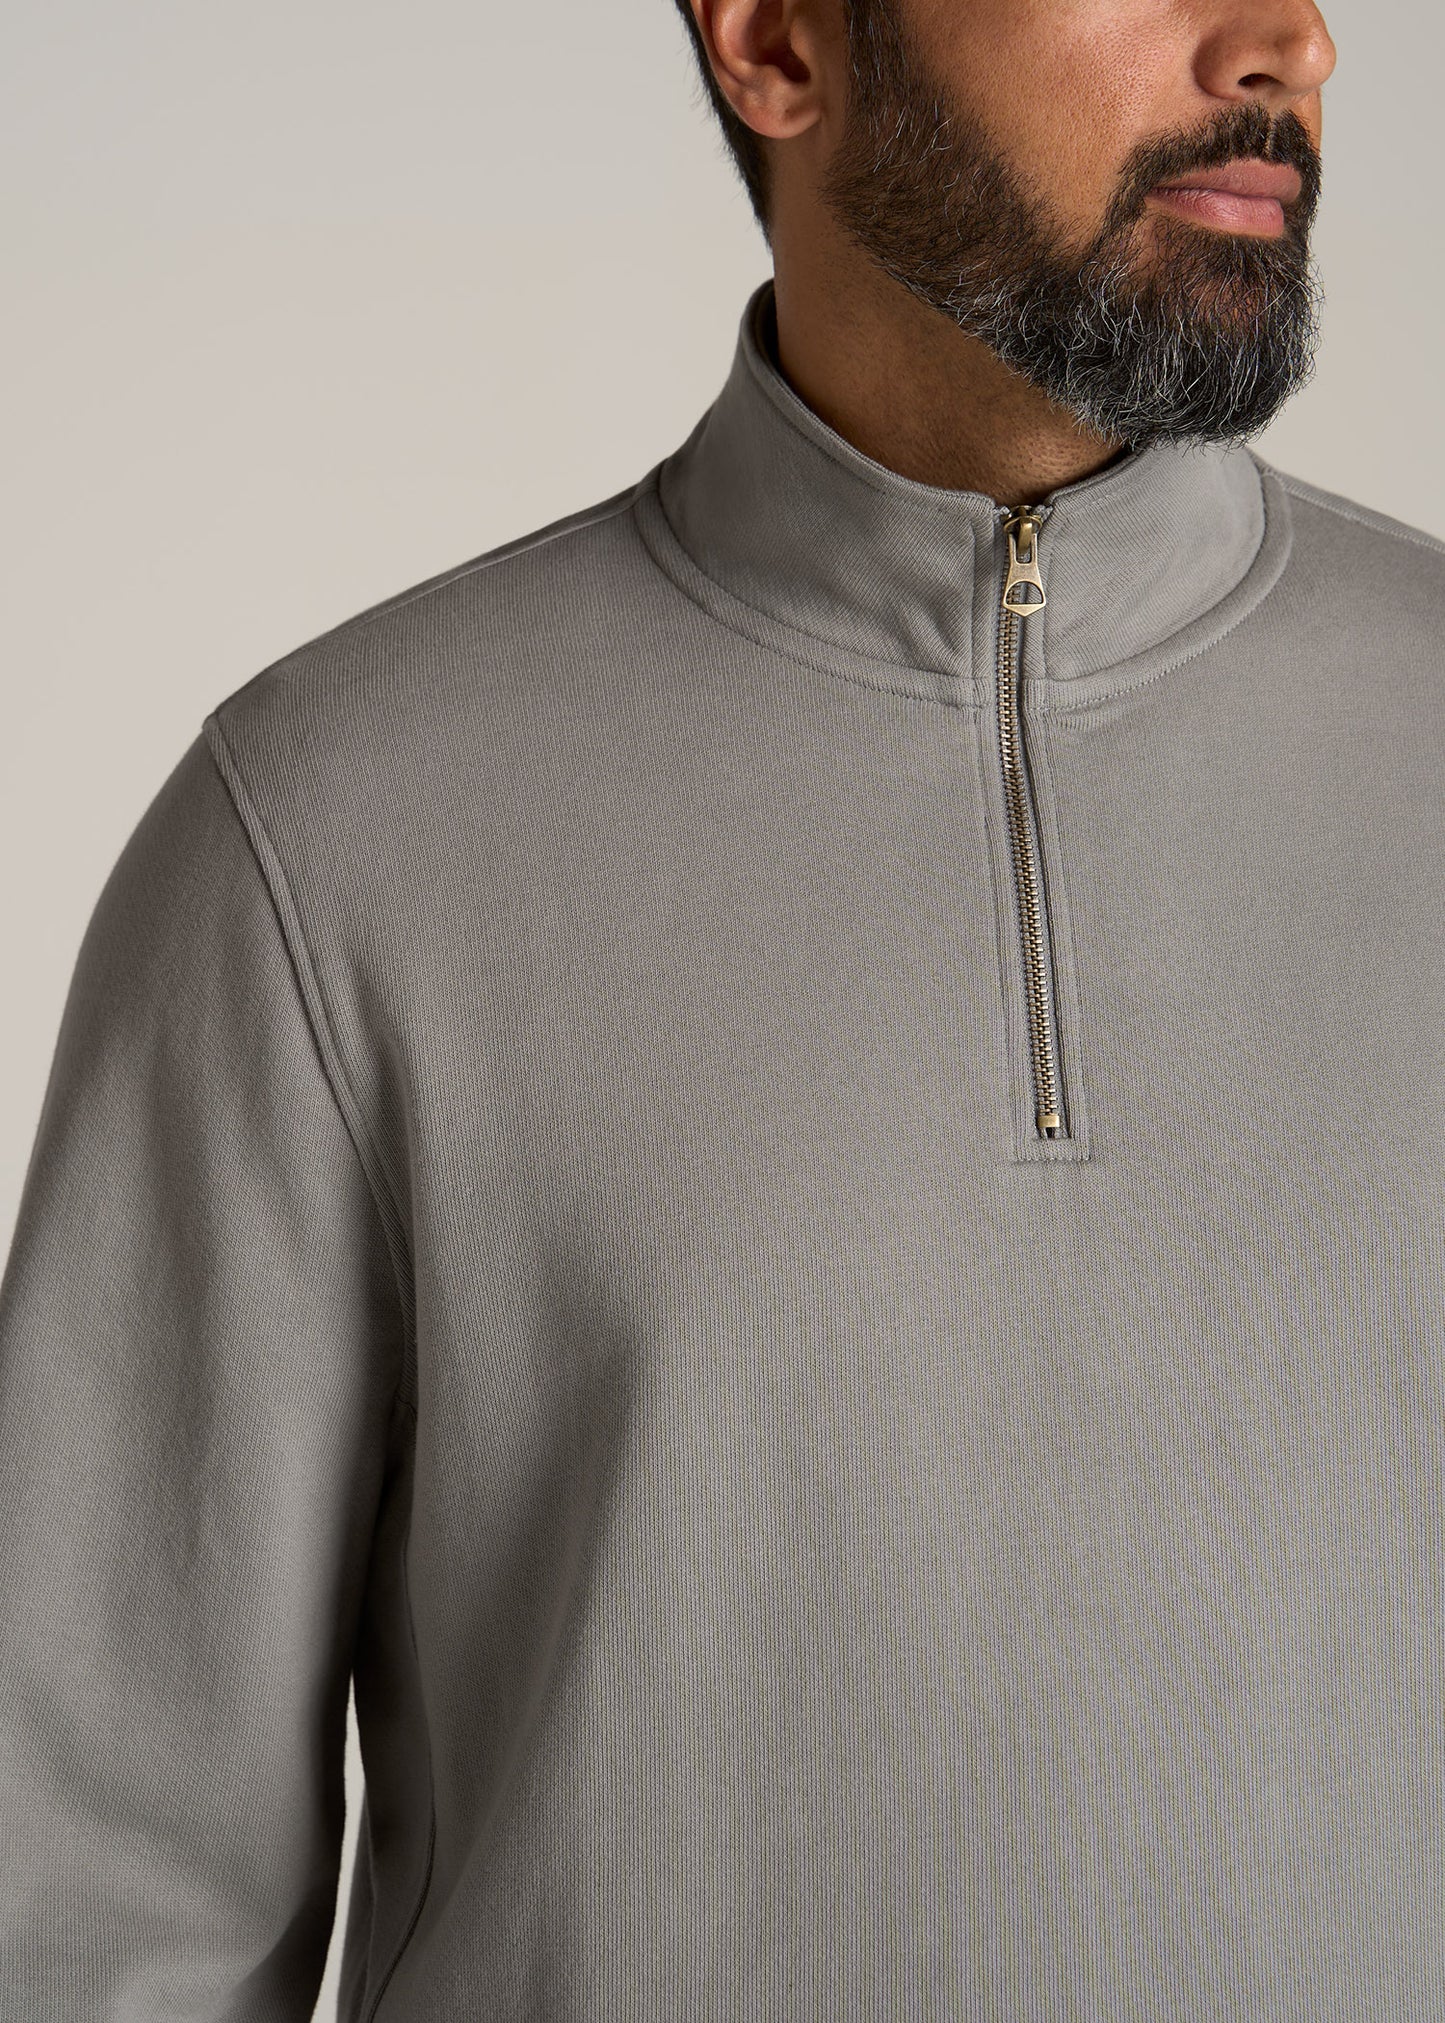 LJ-Heavyweight-French-Terry-Quarter-Zip-Pullover-Pewter-detail